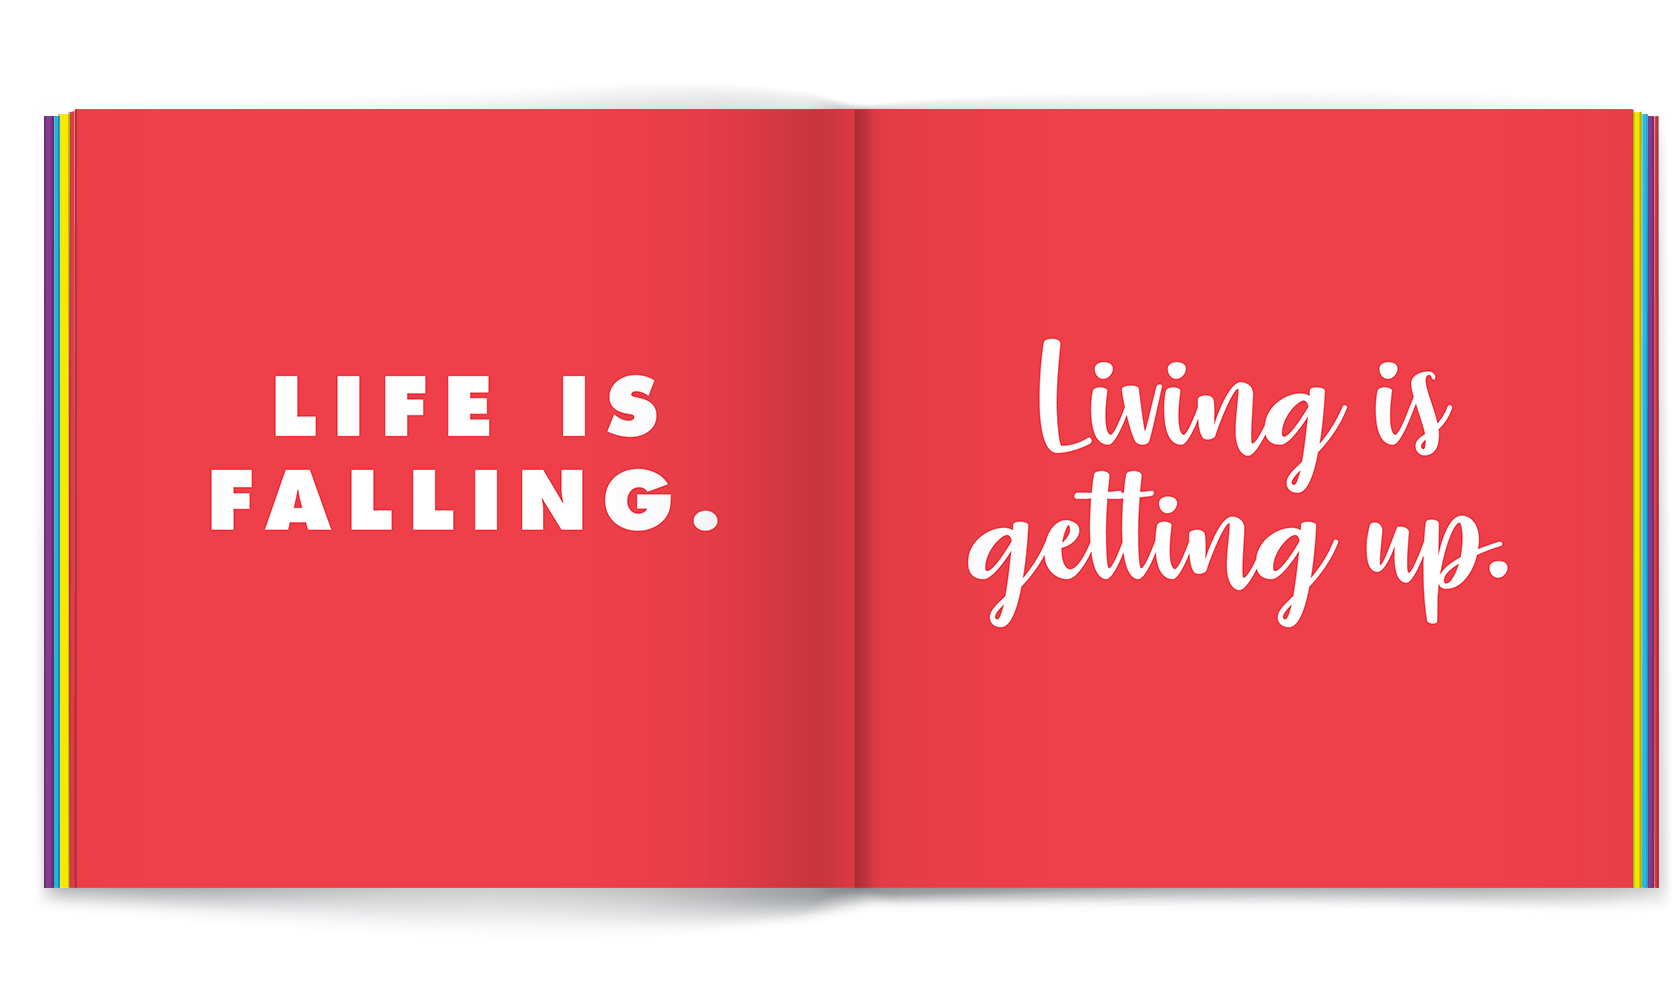 Book quote: Life is falling. Living is getting up.